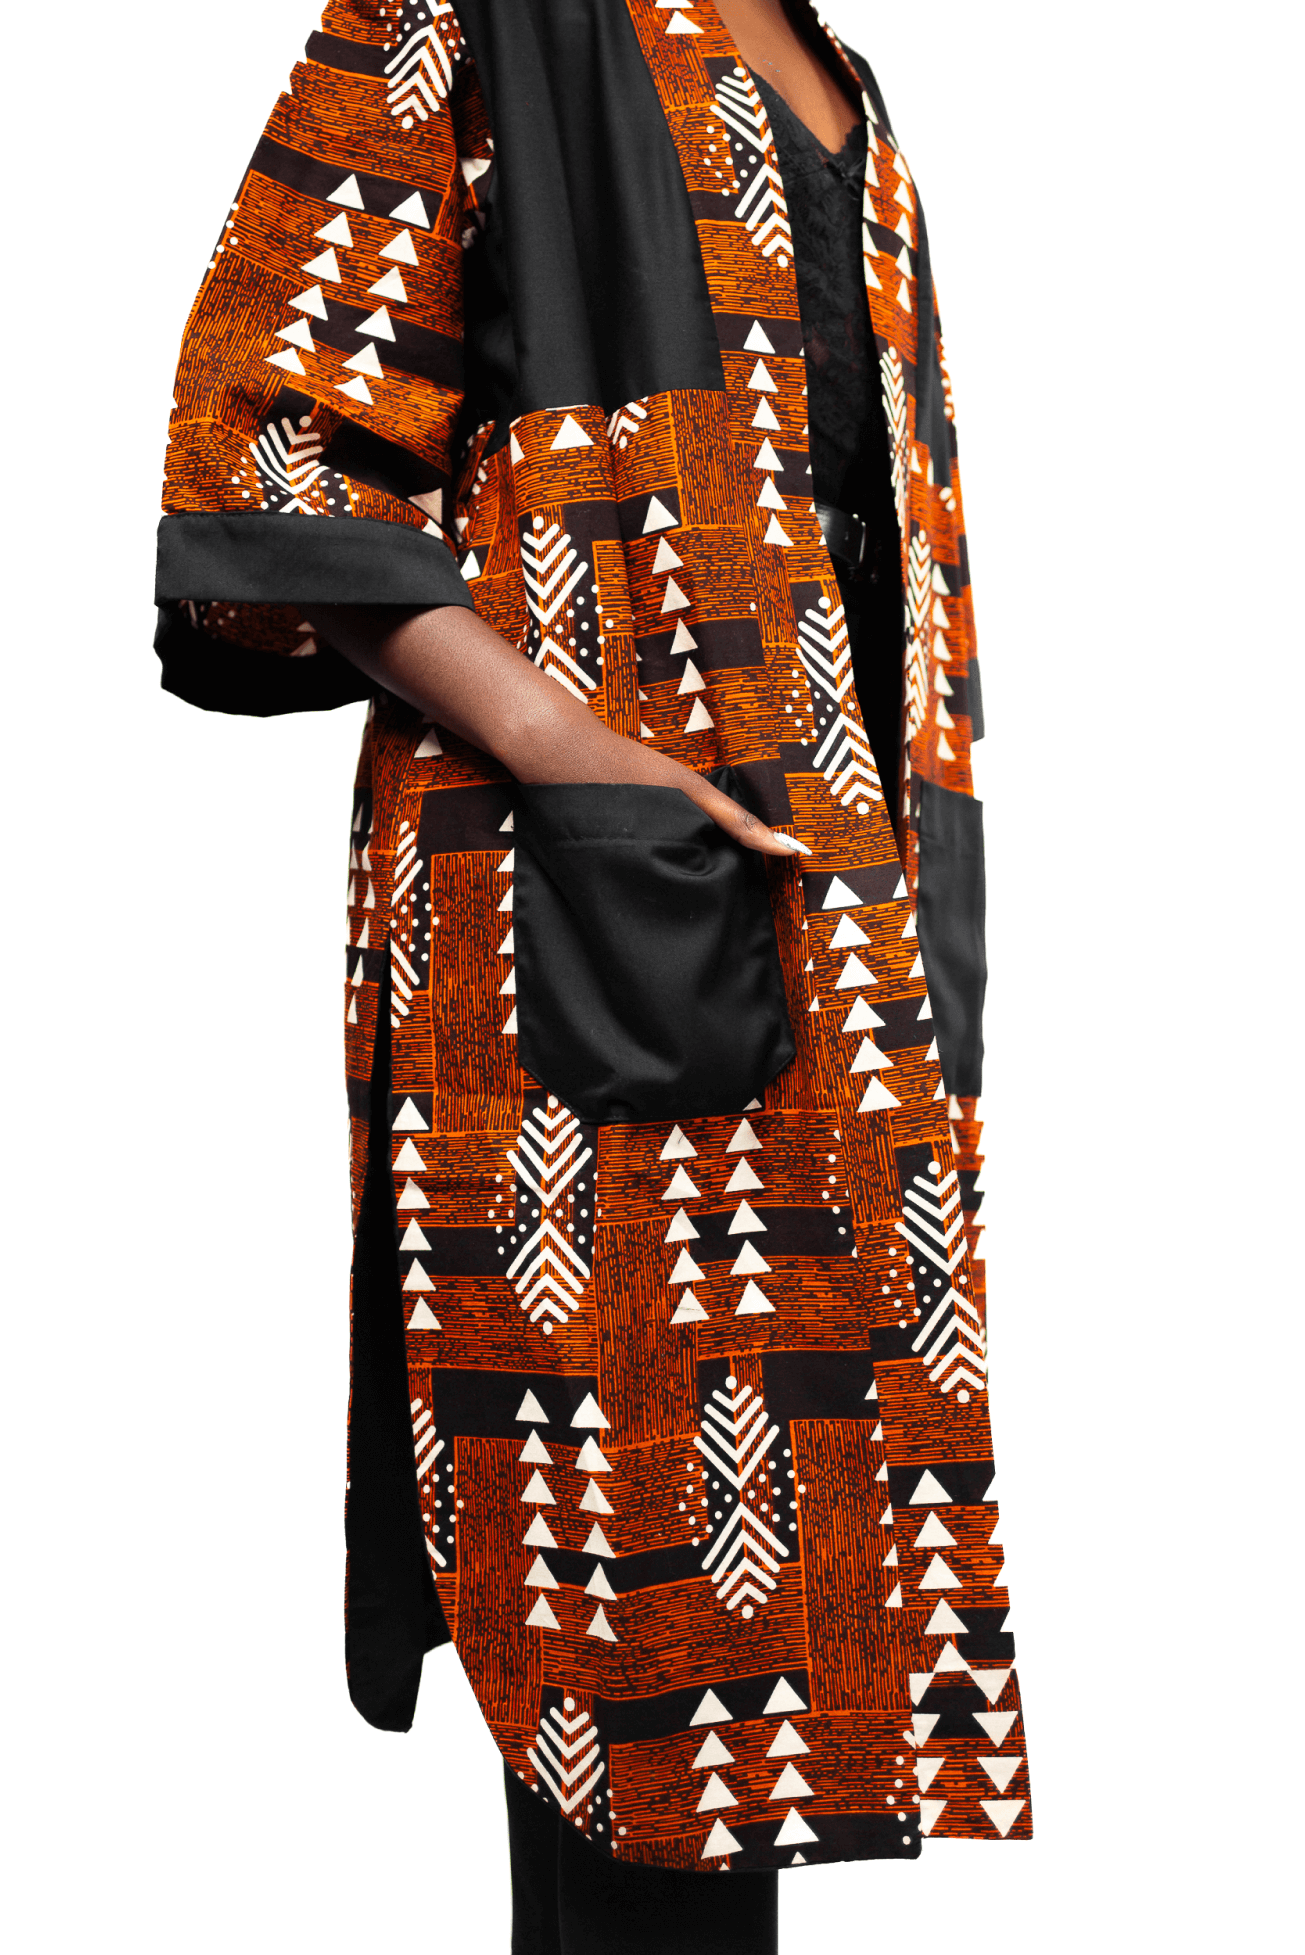 Shop The CloClo Kimono by ELISKIS on Arrai. Discover stylish, affordable clothing, jewelry, handbags and unique handmade pieces from top Kenyan & African fashion brands prioritising sustainability and quality craftsmanship.